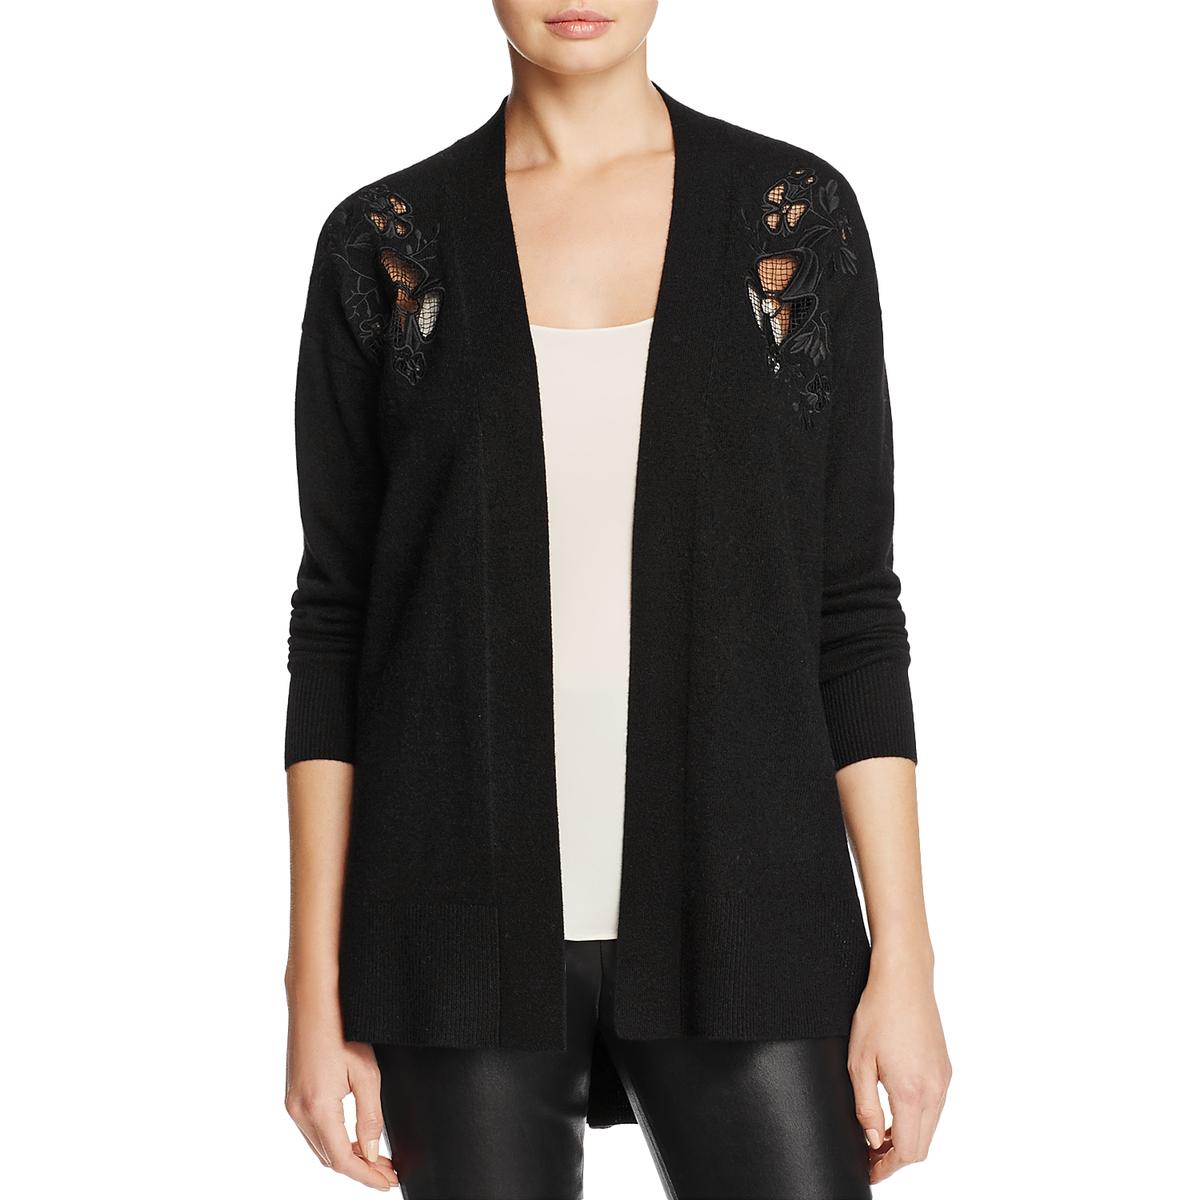 Private Label Womens Black Cashmere Open Front Cardigan Sweater S BHFO ...